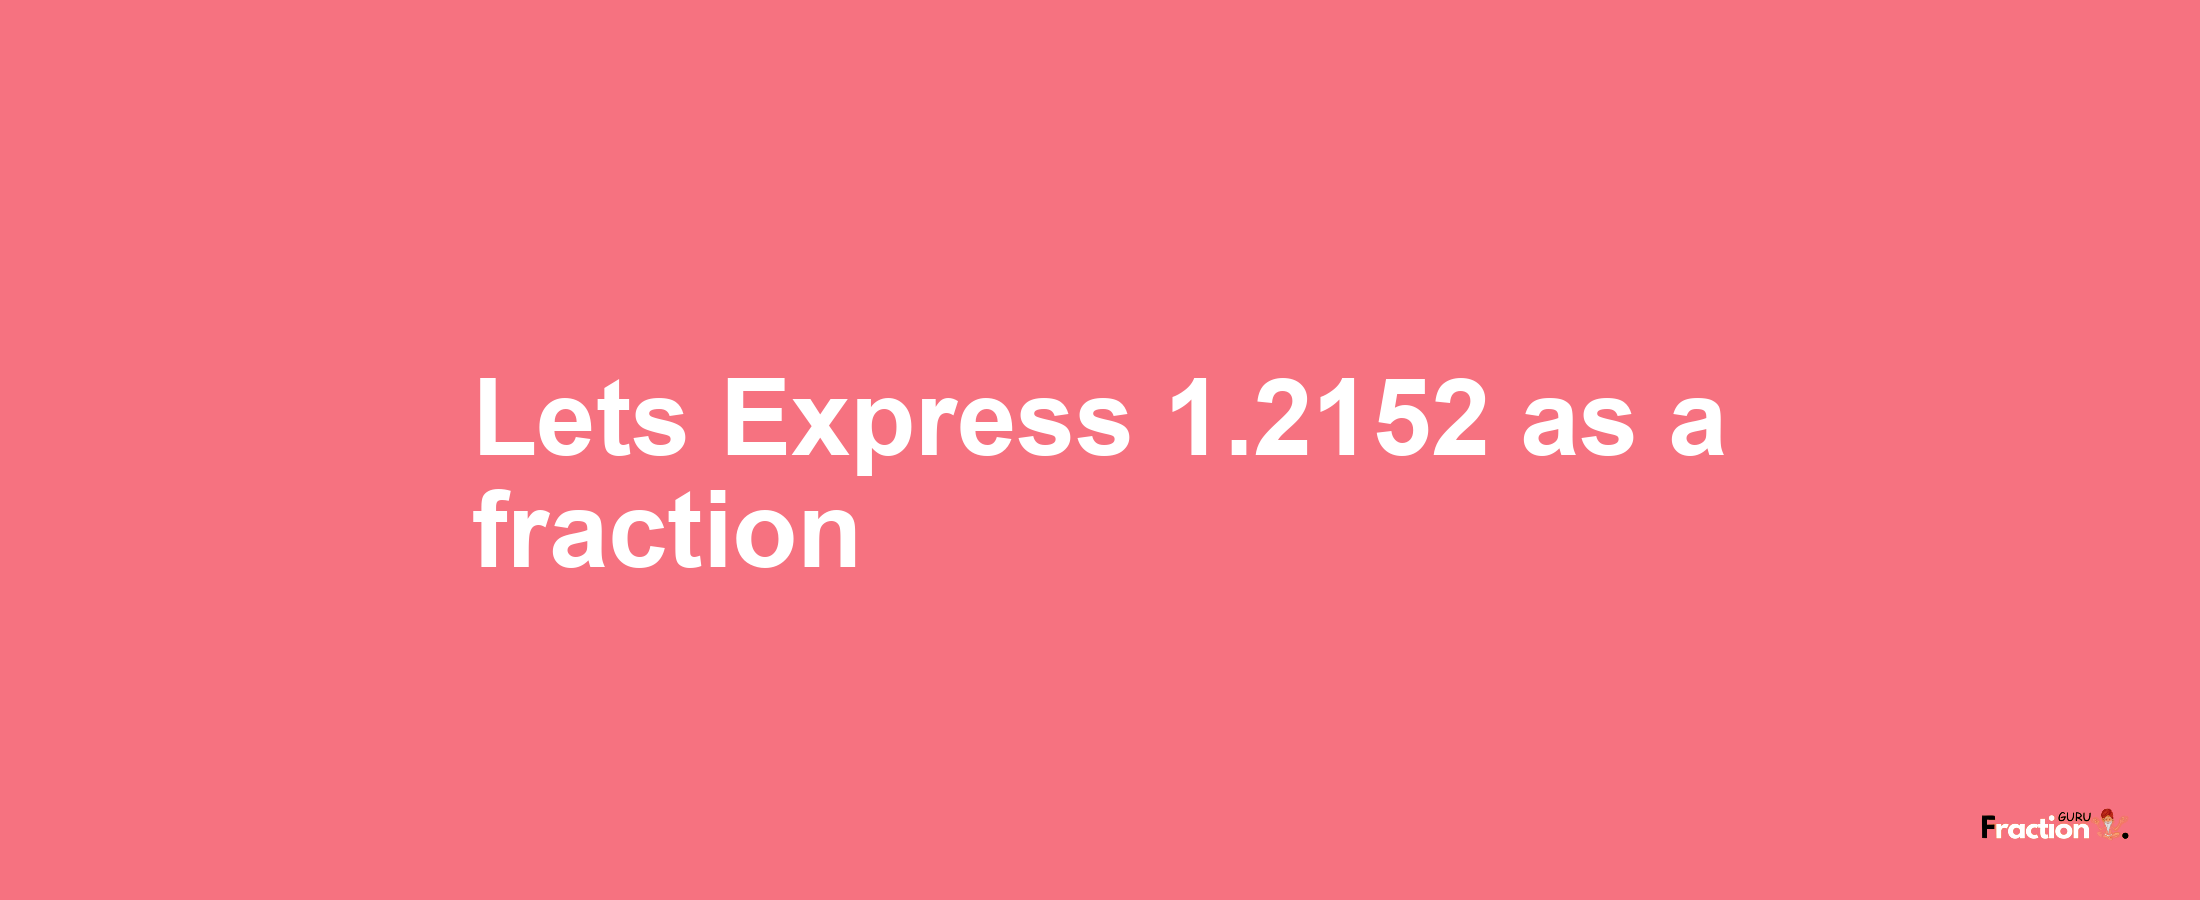 Lets Express 1.2152 as afraction